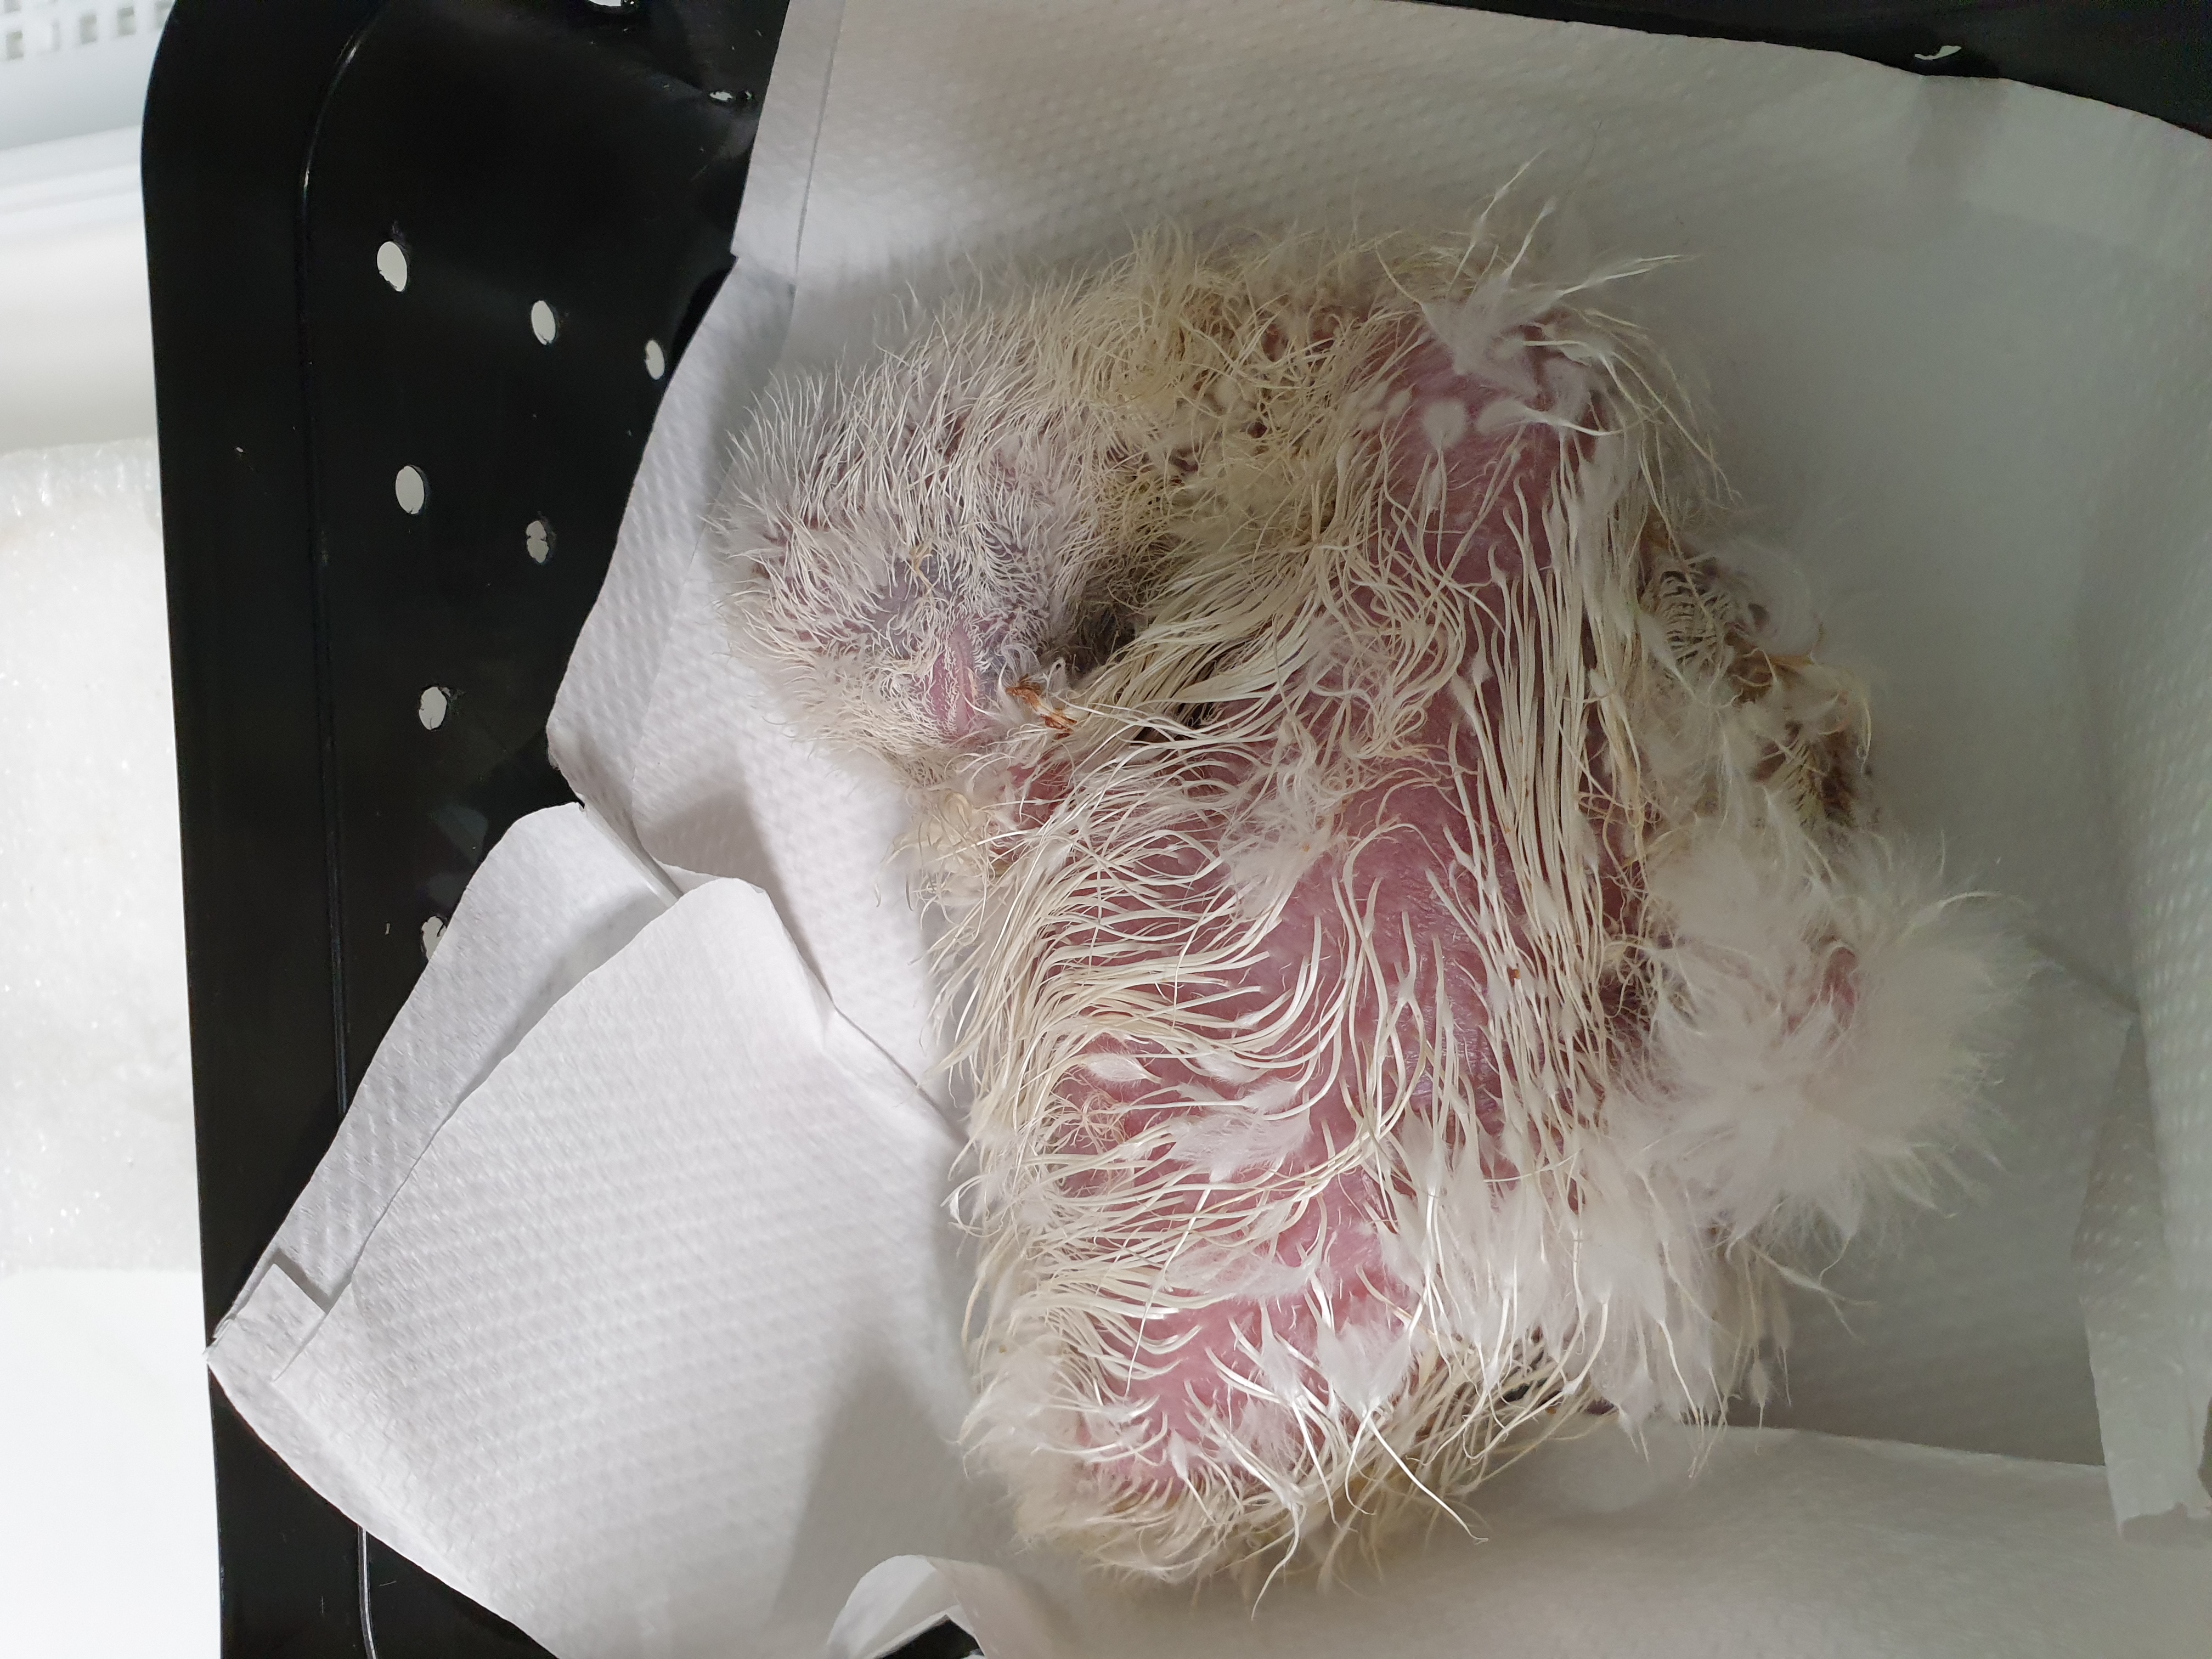 A newly hatched chick ready to be returned to the nest. Hatching in the incubator prevents fly strike